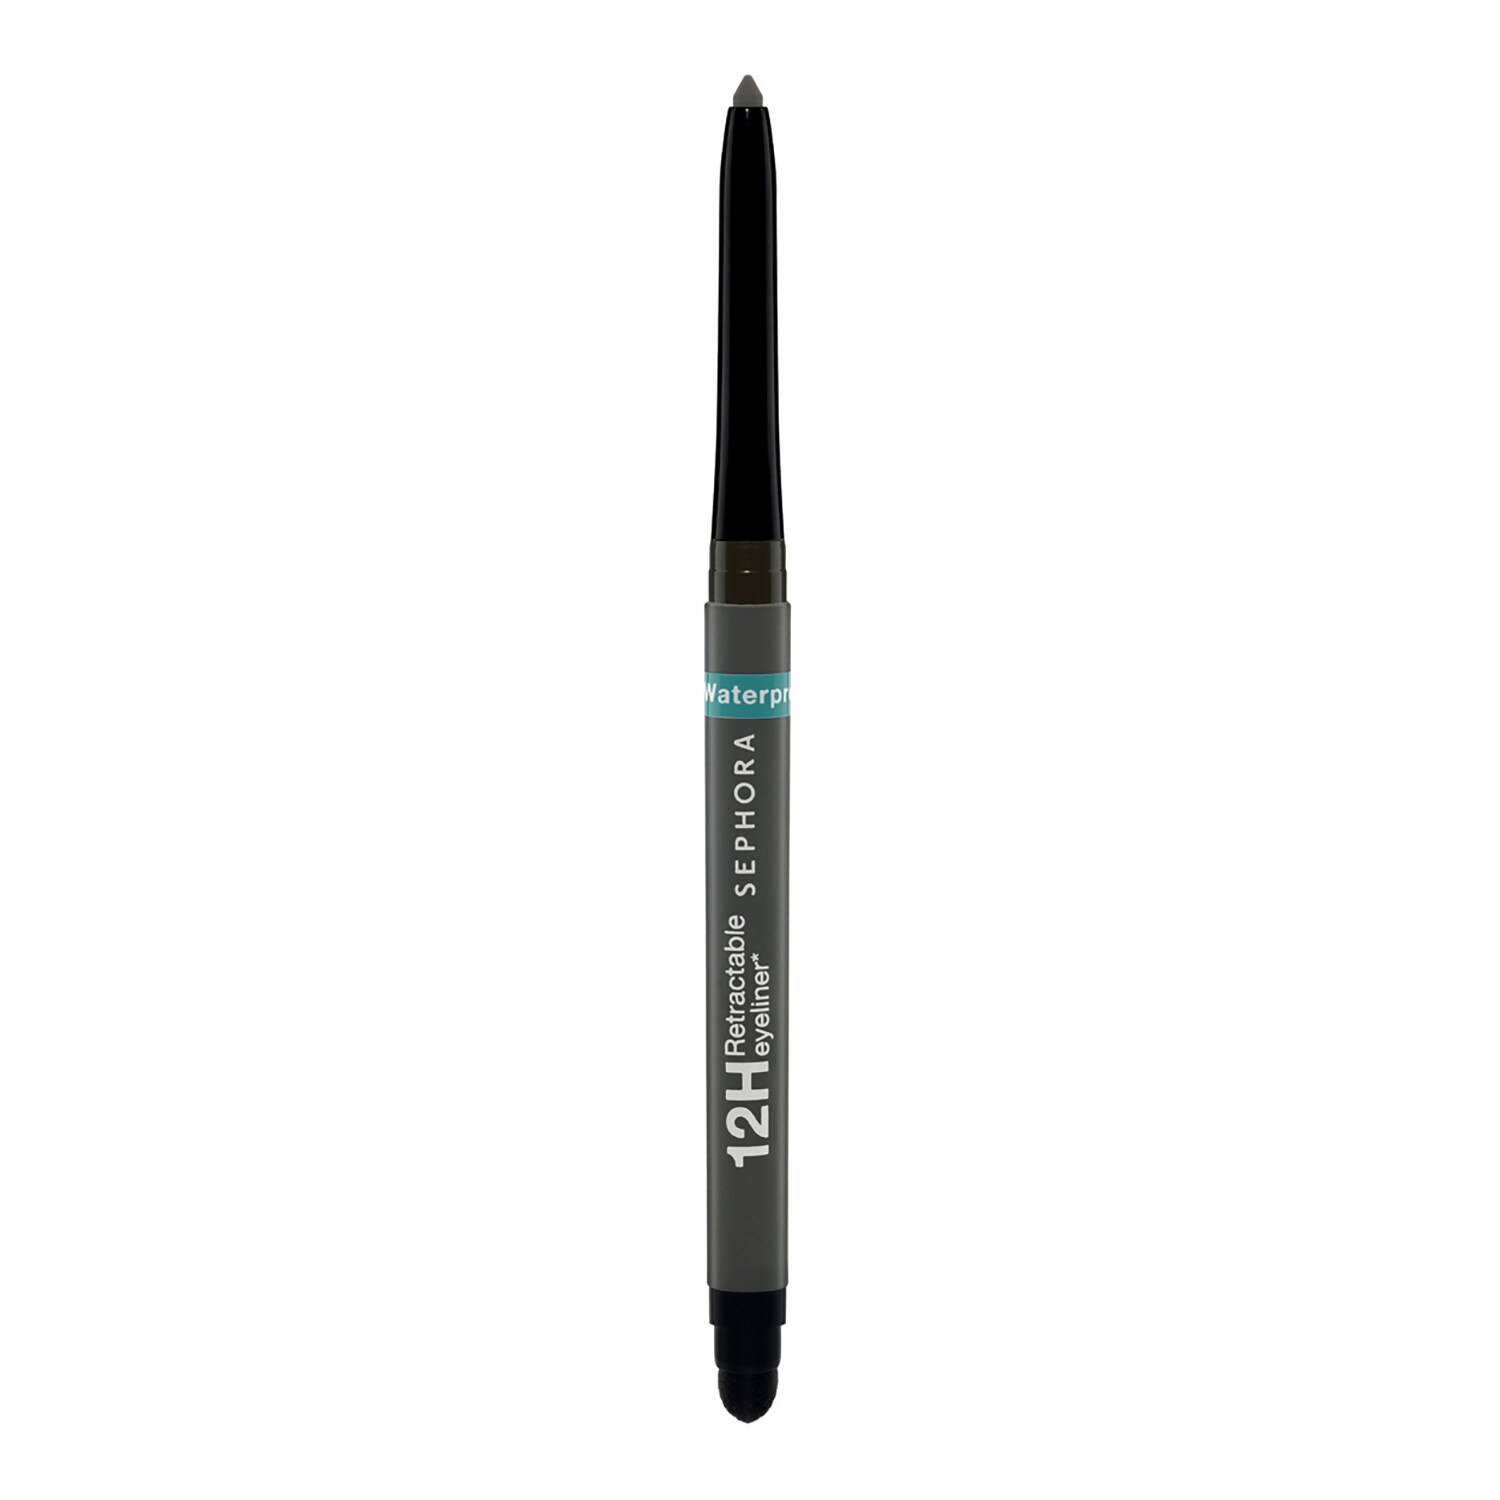 Sephora Collection Waterproof 12H Retractable Eyeliner Pencil 0.3G 11 Matte Charcoal Gray